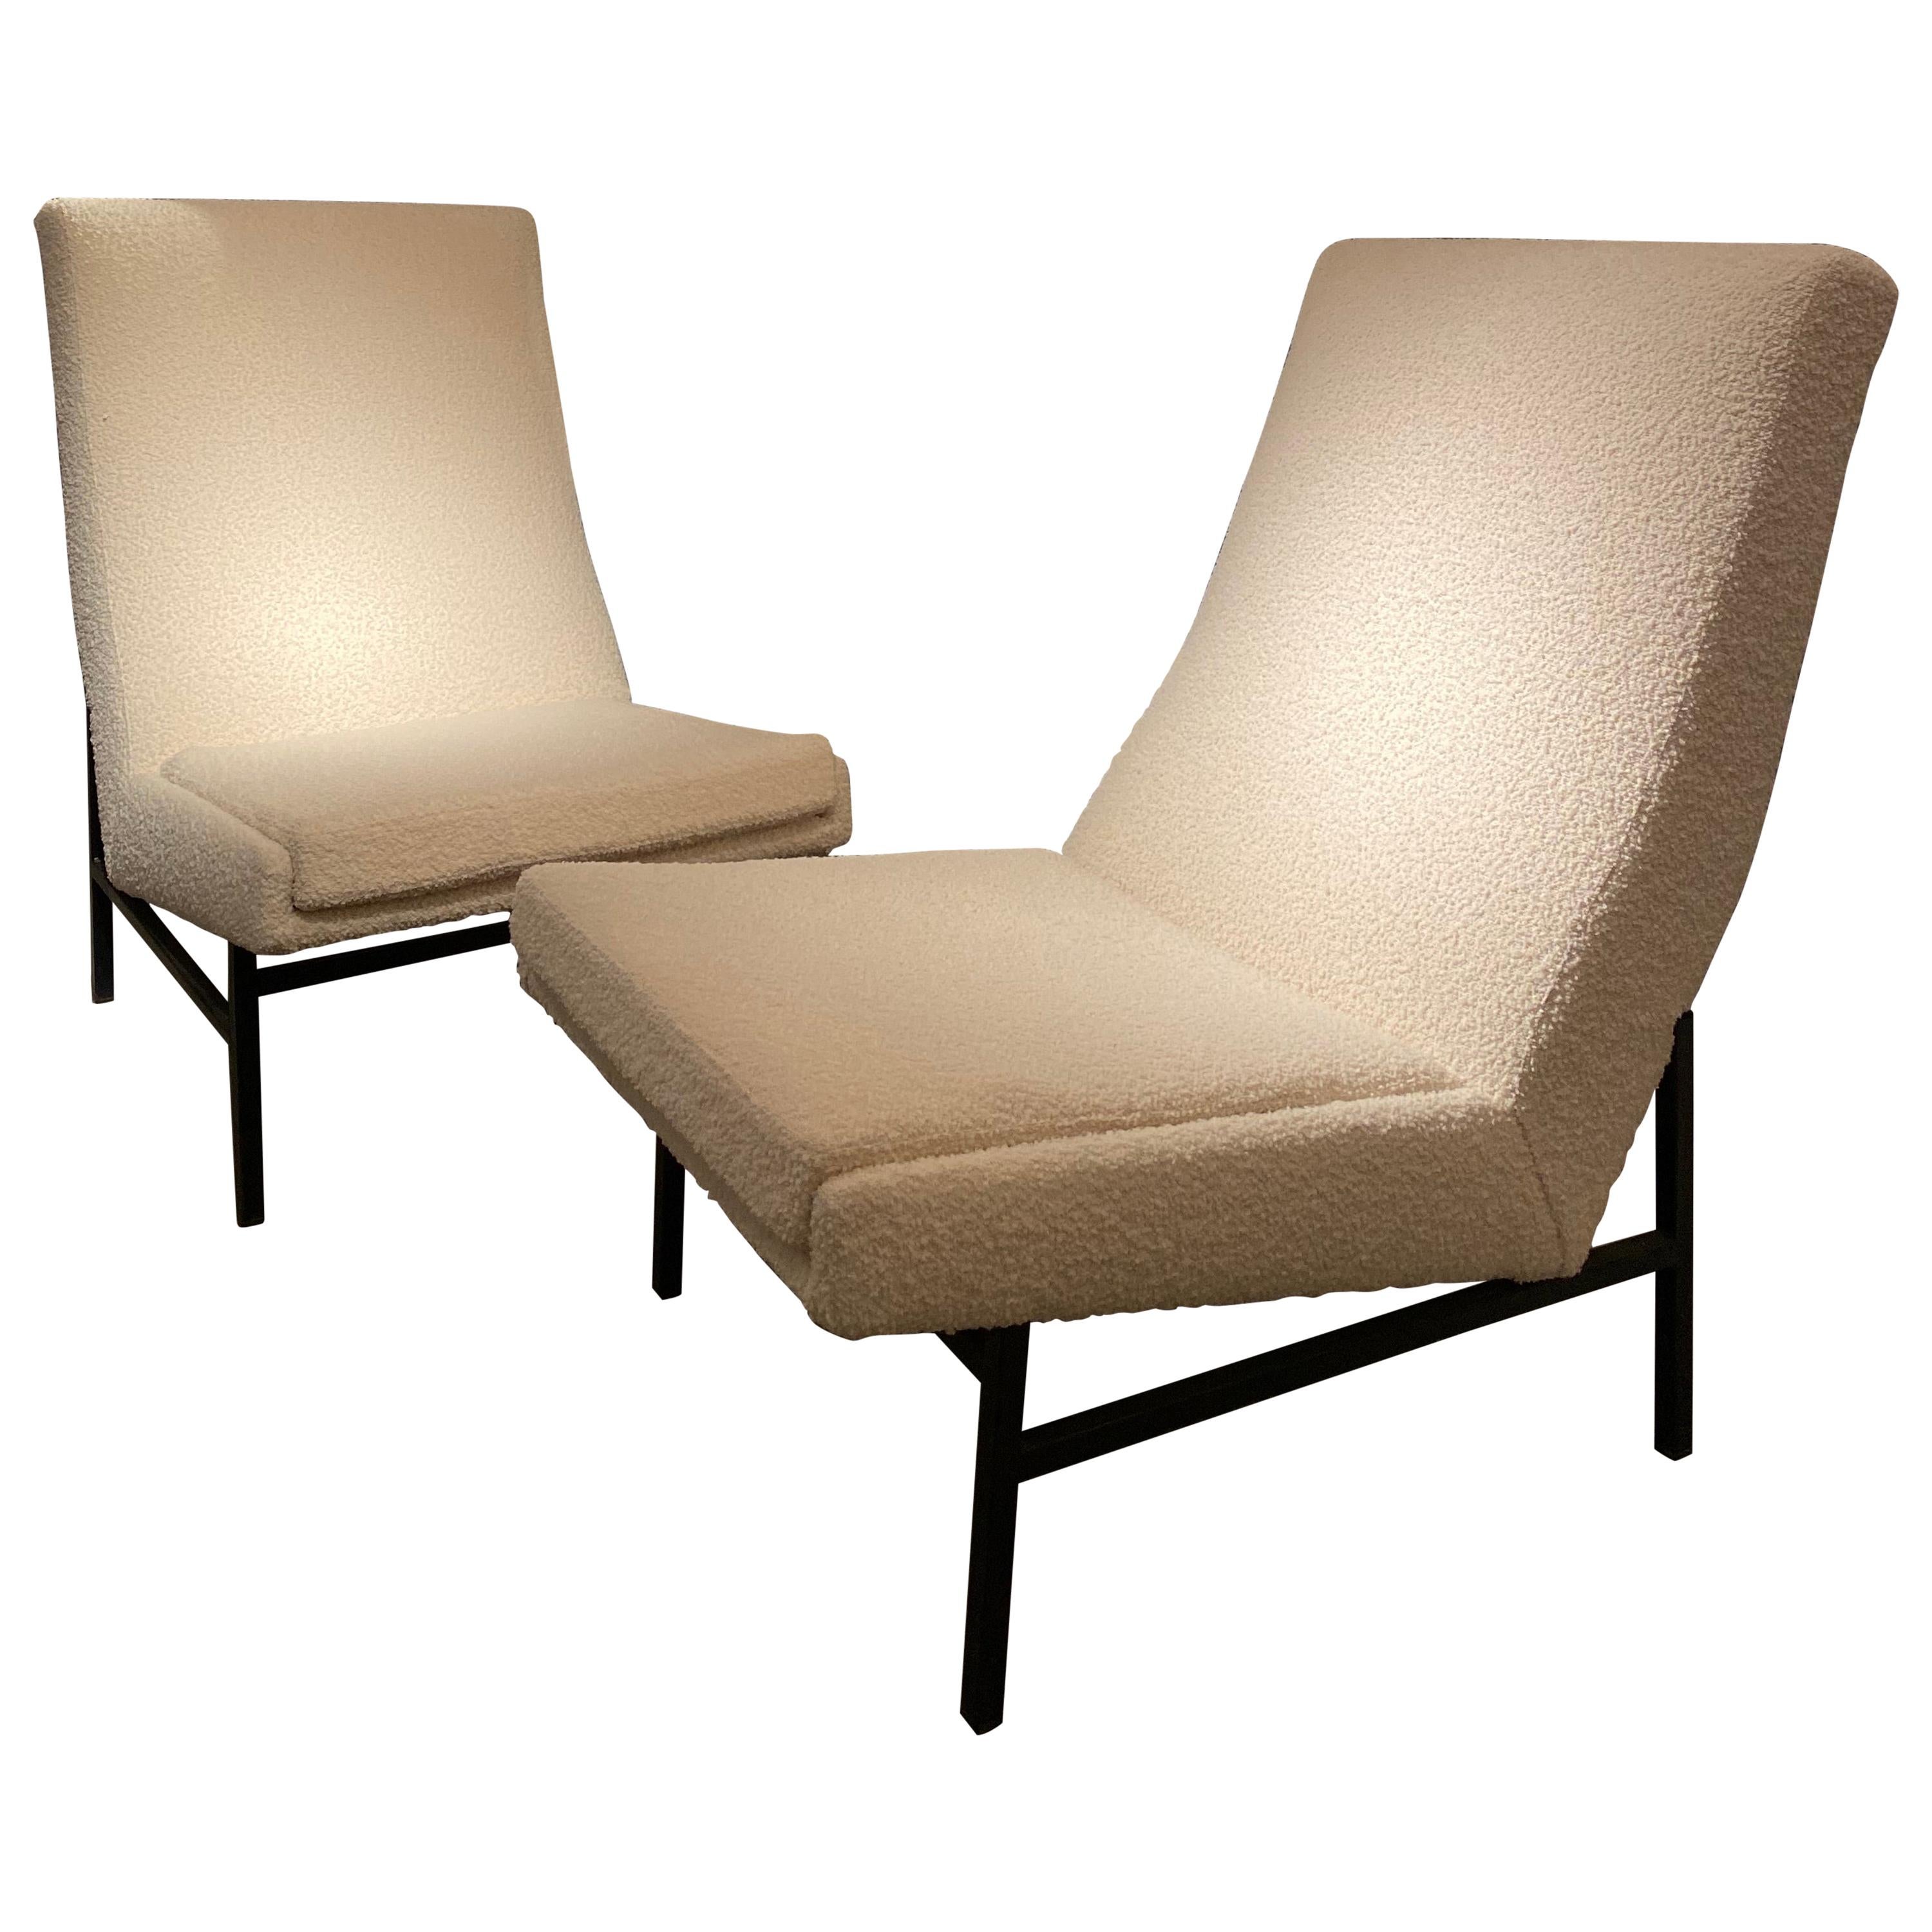 Pierre Guariche Chairs For Sale